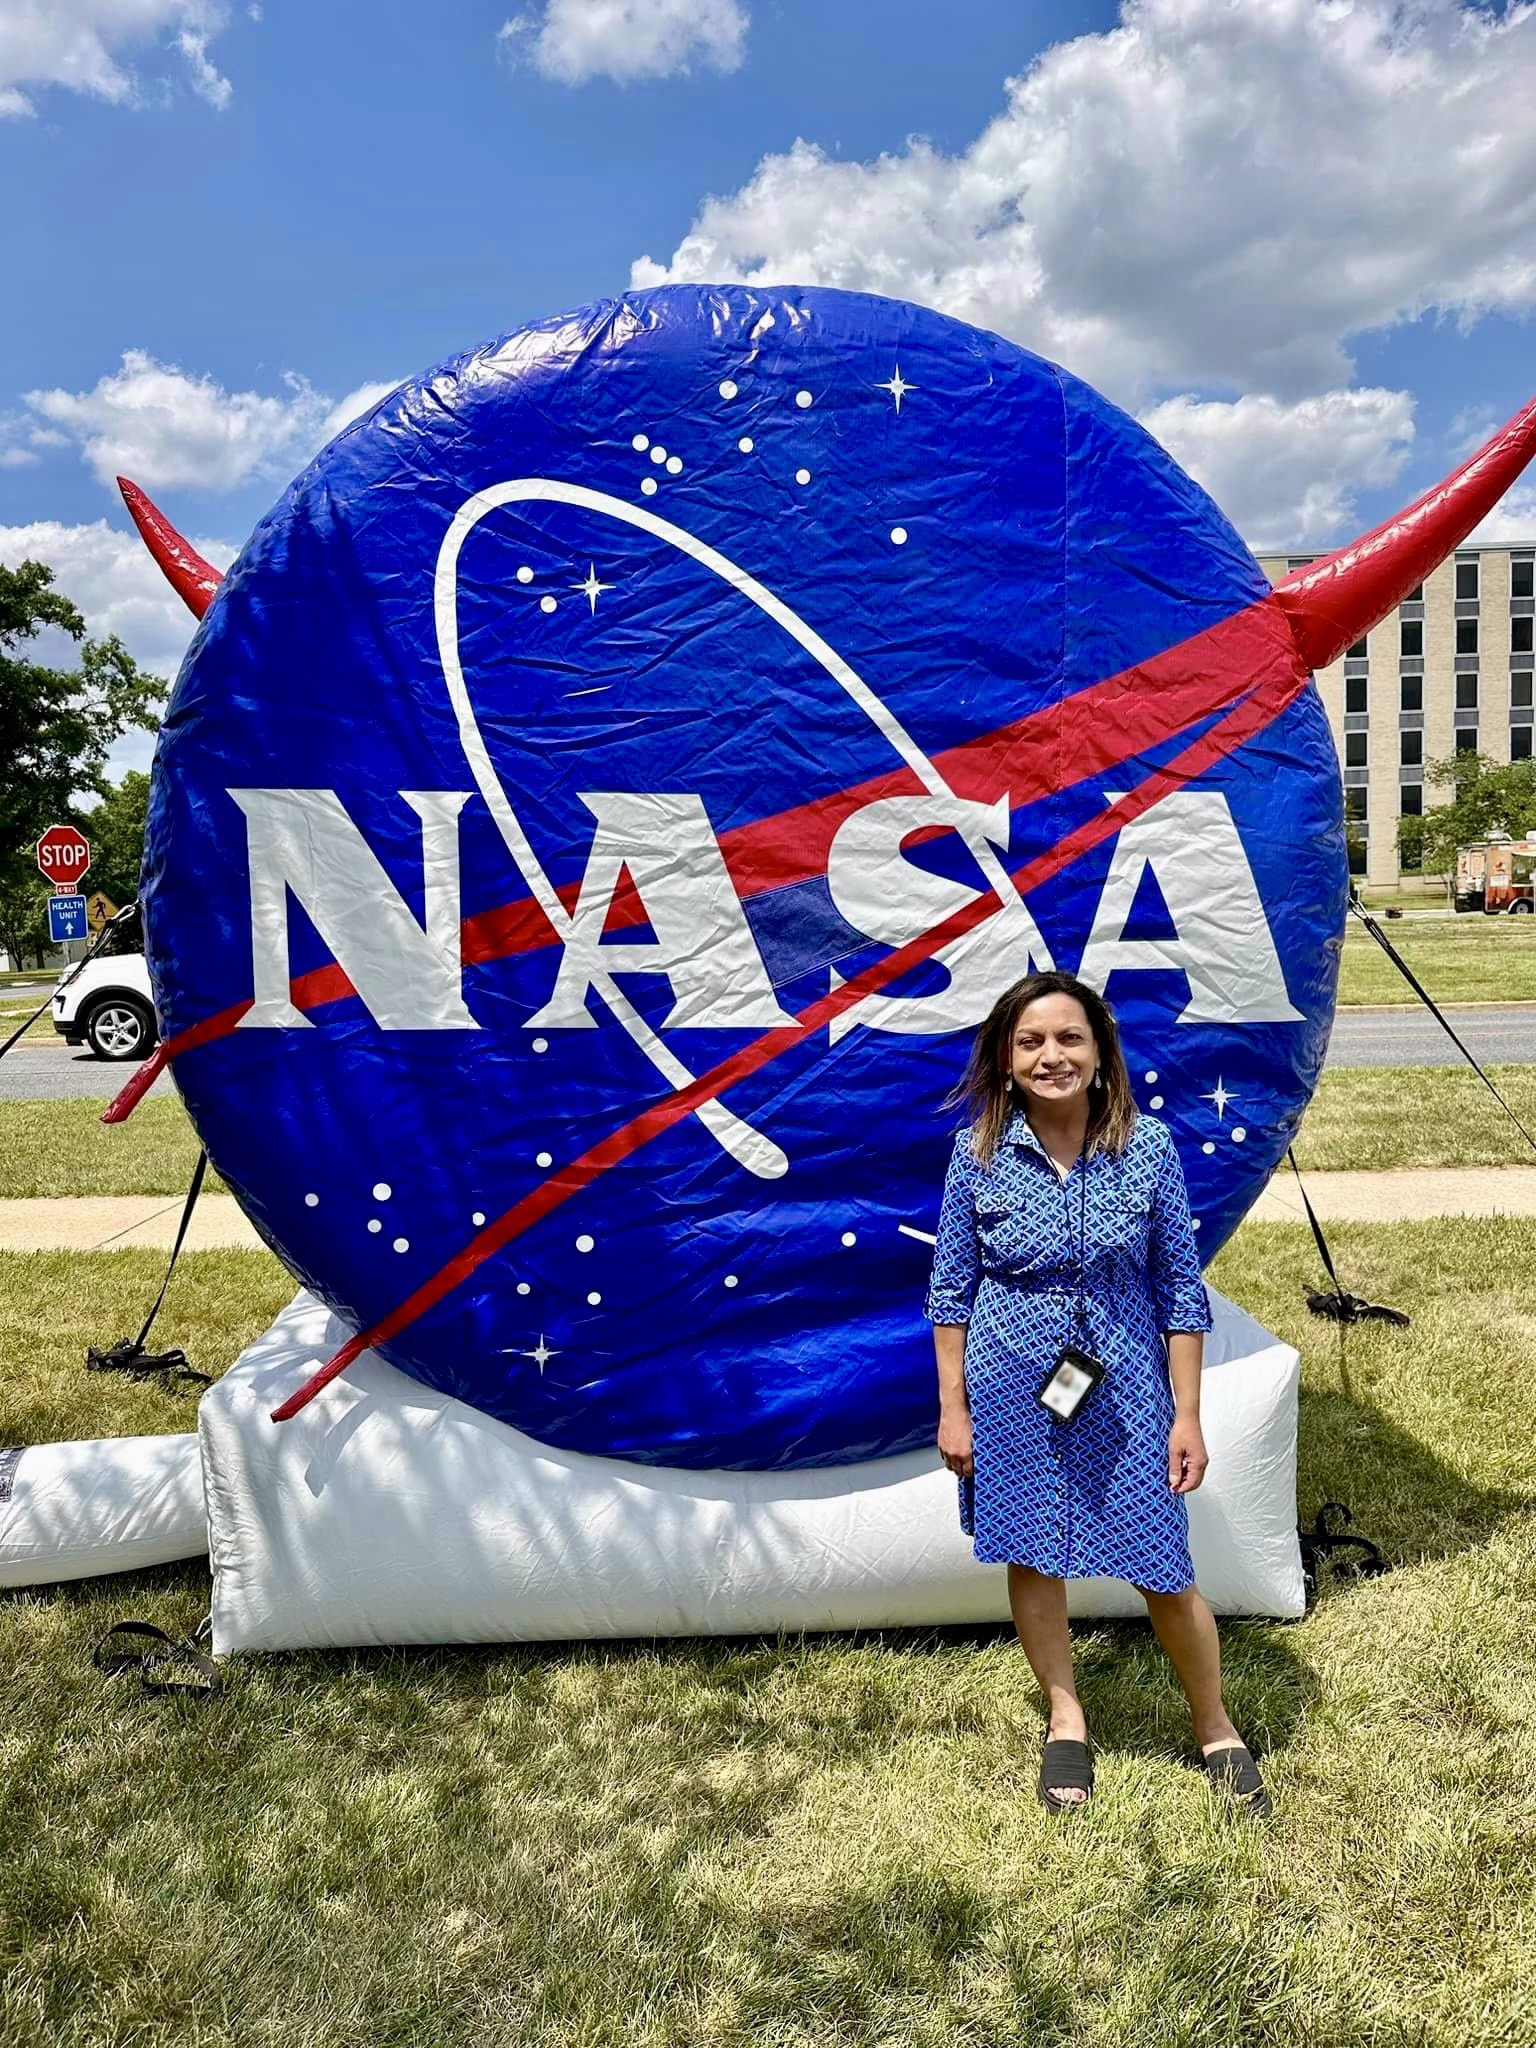 Rita Owens, a woman with shoulder-length, light brown hair, smiles and stands in front of a large inflatable shaped like the NASA logo. It is a large, bright blue circle dotted with stars and crossed by a red, V-shaped swoosh. "NASA" is written in large white text on the circle. Rita wears a patterned blue dress and black sandals. It is a bright, sunny day with blue sky, puffy clouds, and green grass. A building and trucks are visible behind the NASA inflatable.